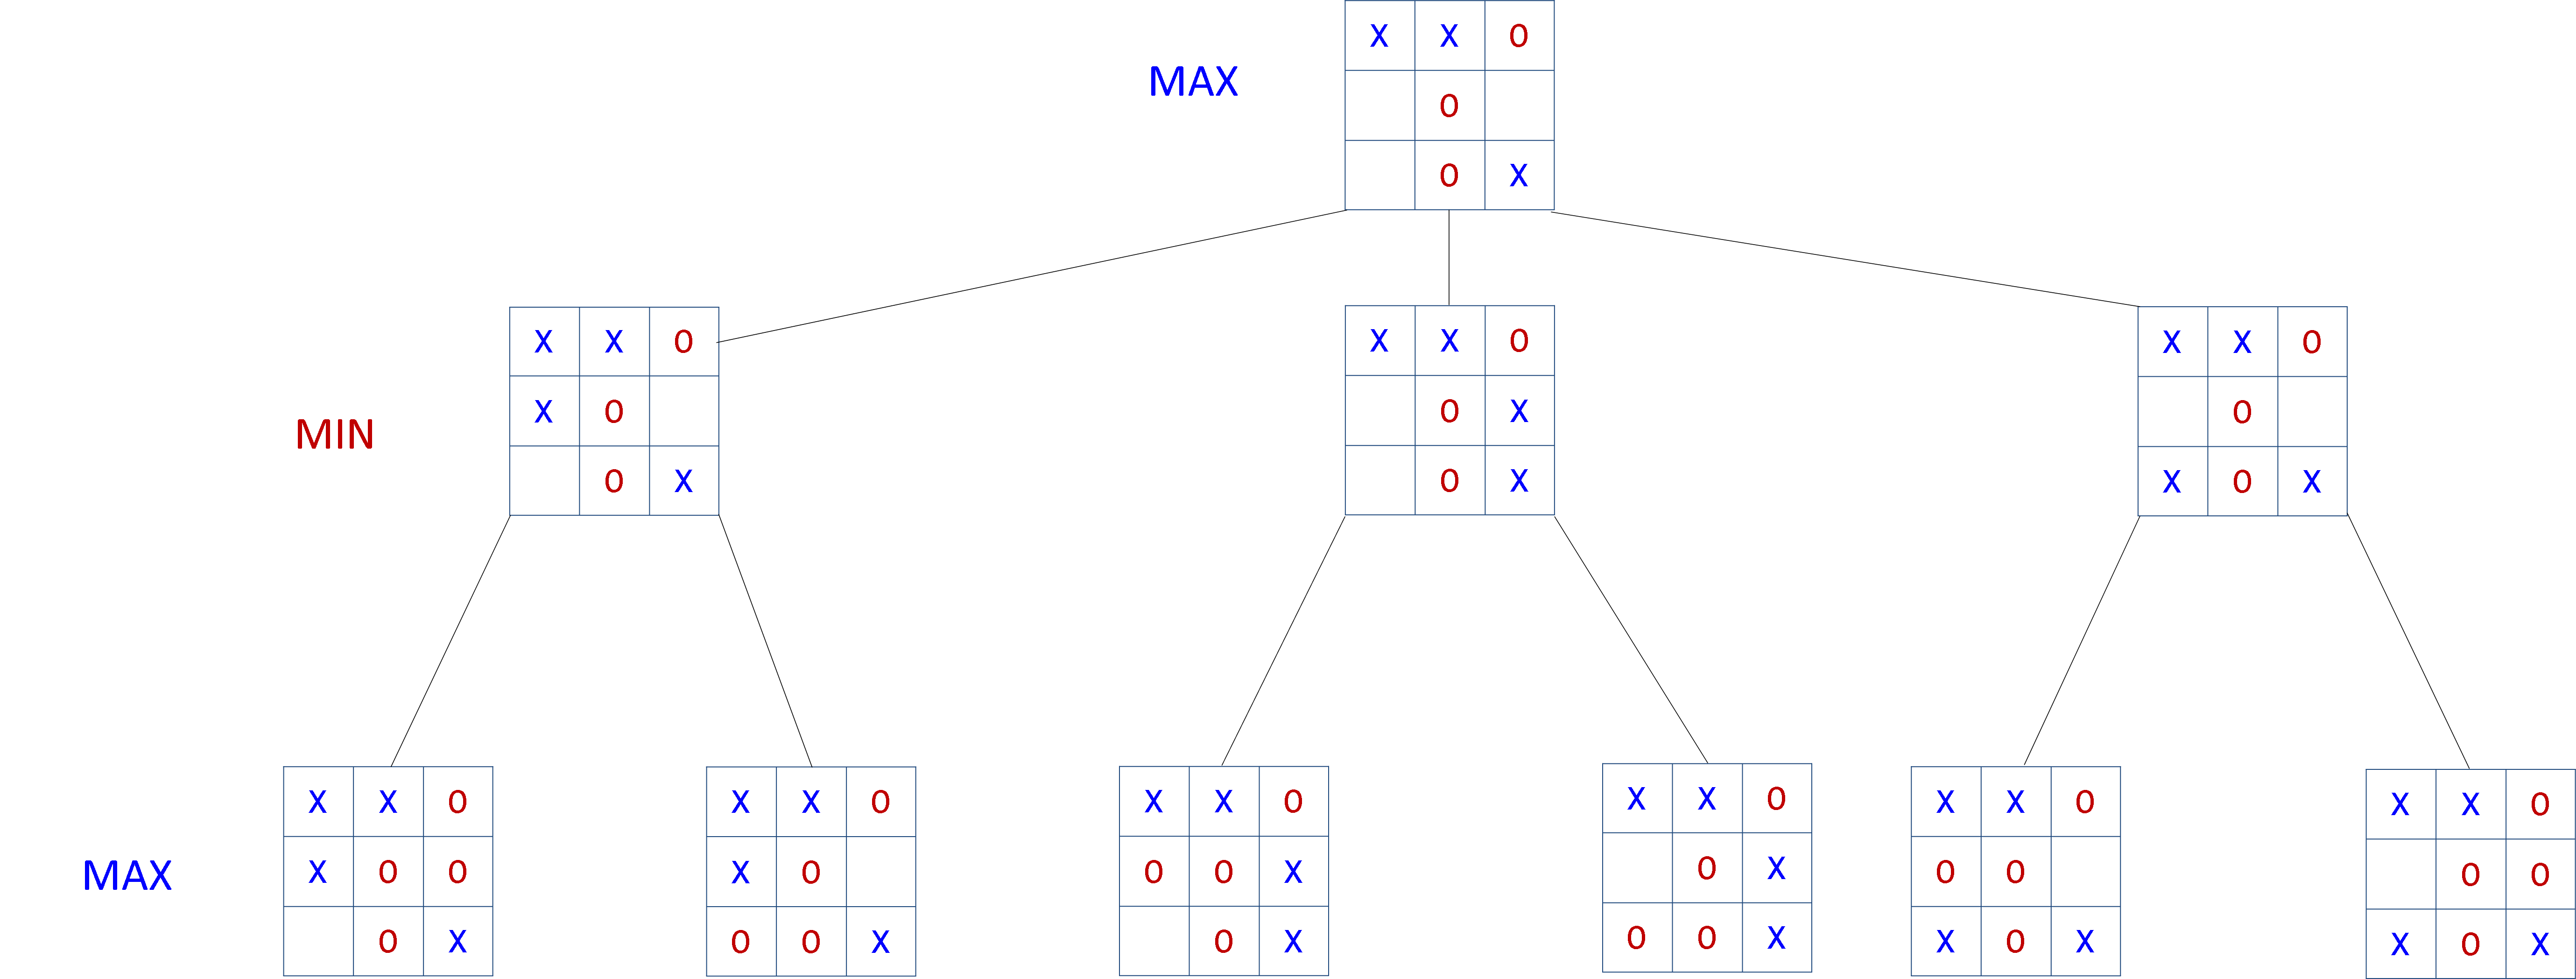 Figure no. 1. Simple Tic-Tac-Toe game (left), and the source code